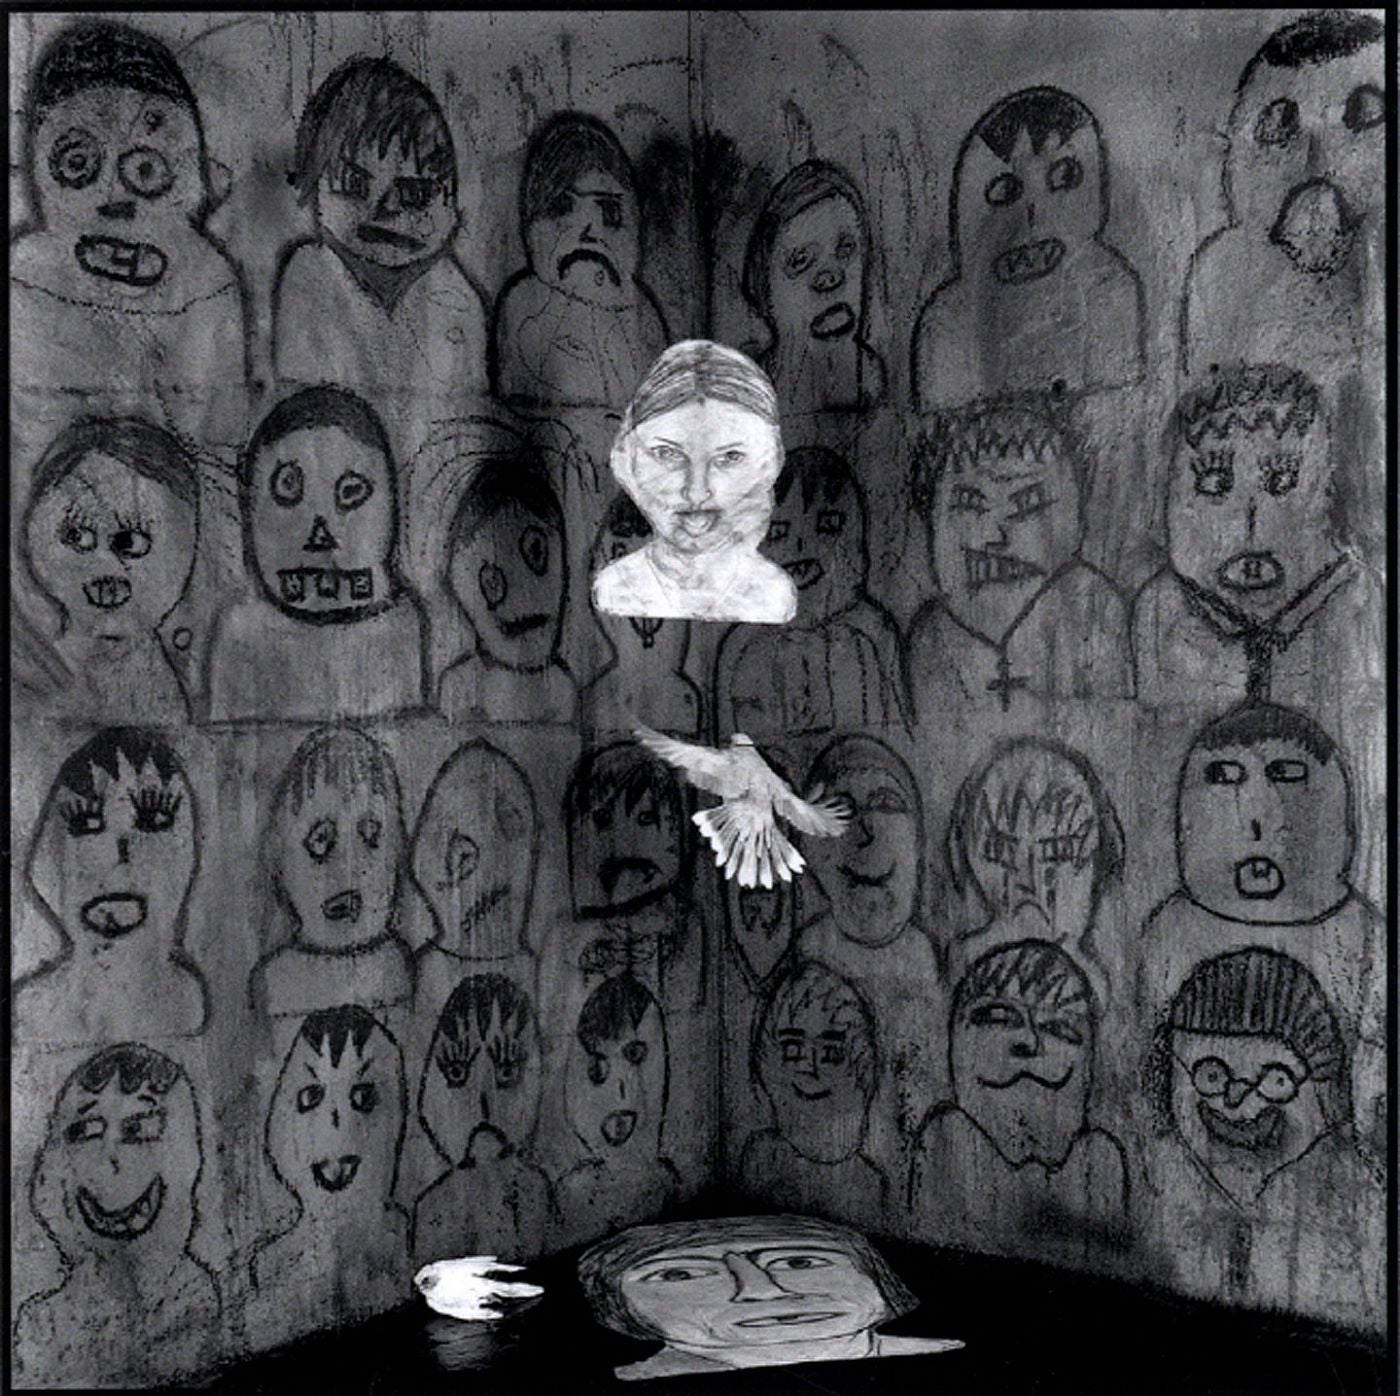 Roger Ballen: The Audience (One Picture Book #85), Limited Edition (with Print)